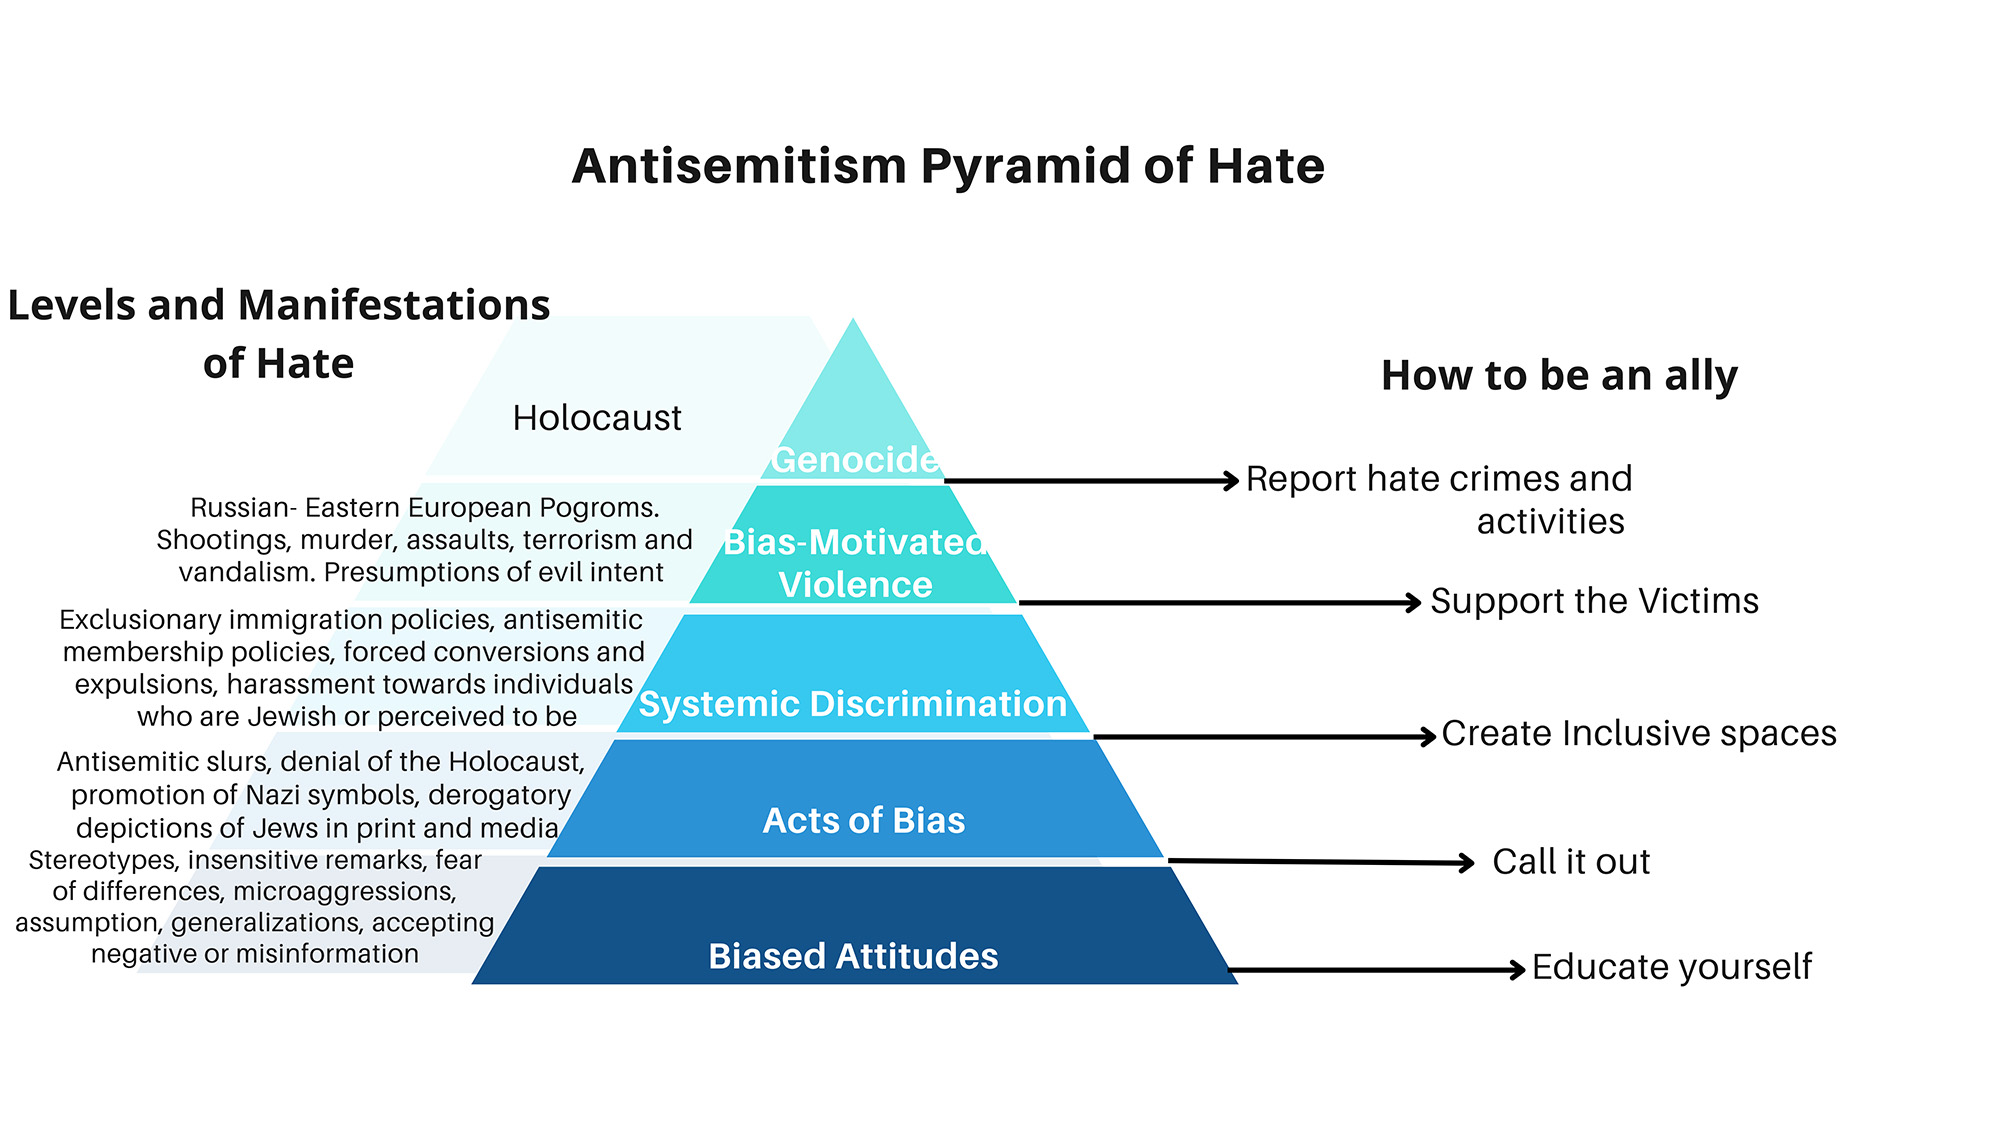 Five level Antisemitism Pyramid of Hate including Levels and Manifestations of Hate and How to be an ally.Level one genocide examples holocaust, report crimes and activities. Level two Bias-motivated violence examples Russian- Eastern European Pogroms. Shootings, murder, assaults, terrorism and vandalism. Presumptions of evil intent. Support the victims. Level three, Systemic Discrimination examples, Exclusionary immigration policies, antisemitic membership policies, forced conversions and expulsions, and harassment towards individuals who are Jewish or perceived to be. Create inclusive spaces. Level four Acts of Bias examples, antisemitic slurs, denial of the Holocaust, promotion of Nazi symbols, and derogatory depictions of Jews in print and media. Call it out. Level 5 Biased attitudes, examples Stereotypes, insensitive remarks, fear of differences, macroaggressions, assumptions, generalizations, accepting negative or misinformation. Educate yourself 